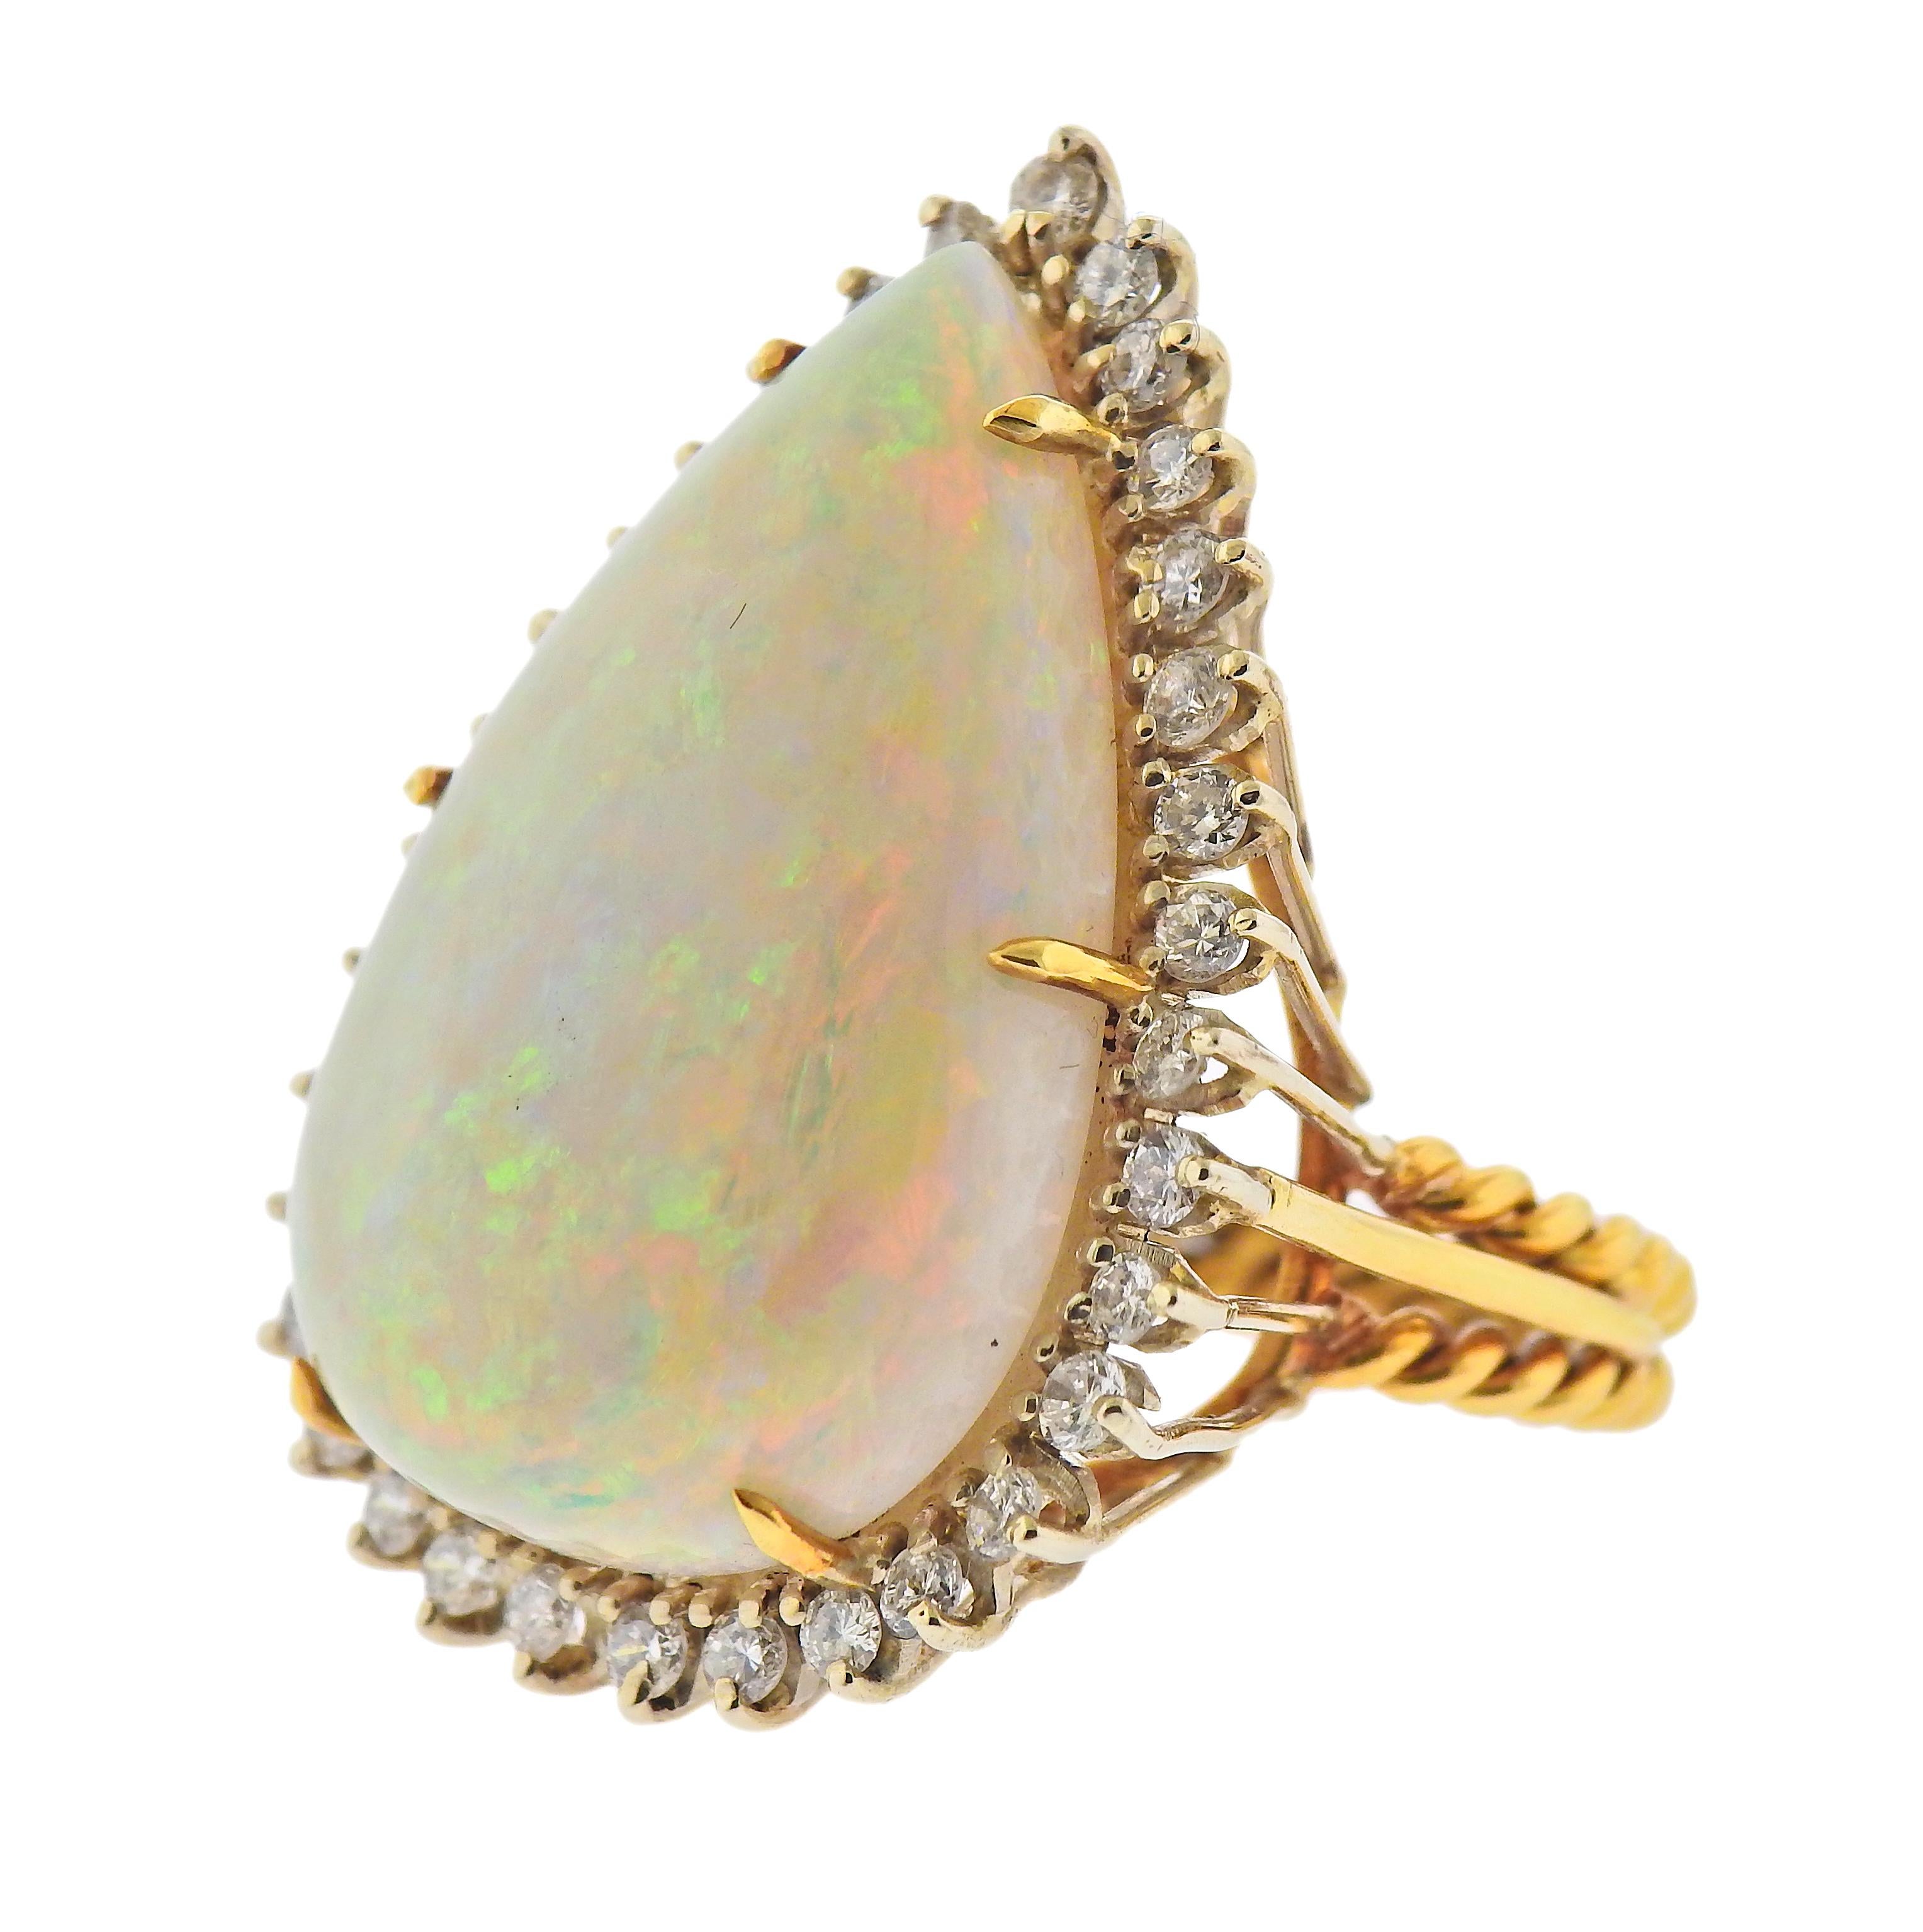 Large 18k gold cocktail ring, featuring pear shape 30mm x 20.6mm x 8.4mm opal gemstone. Surrounded with approx. 1.10ctw in diamonds. Ring size - 8.5, ring top - 36mm x 26mm. Weight - 16.4 grams. 